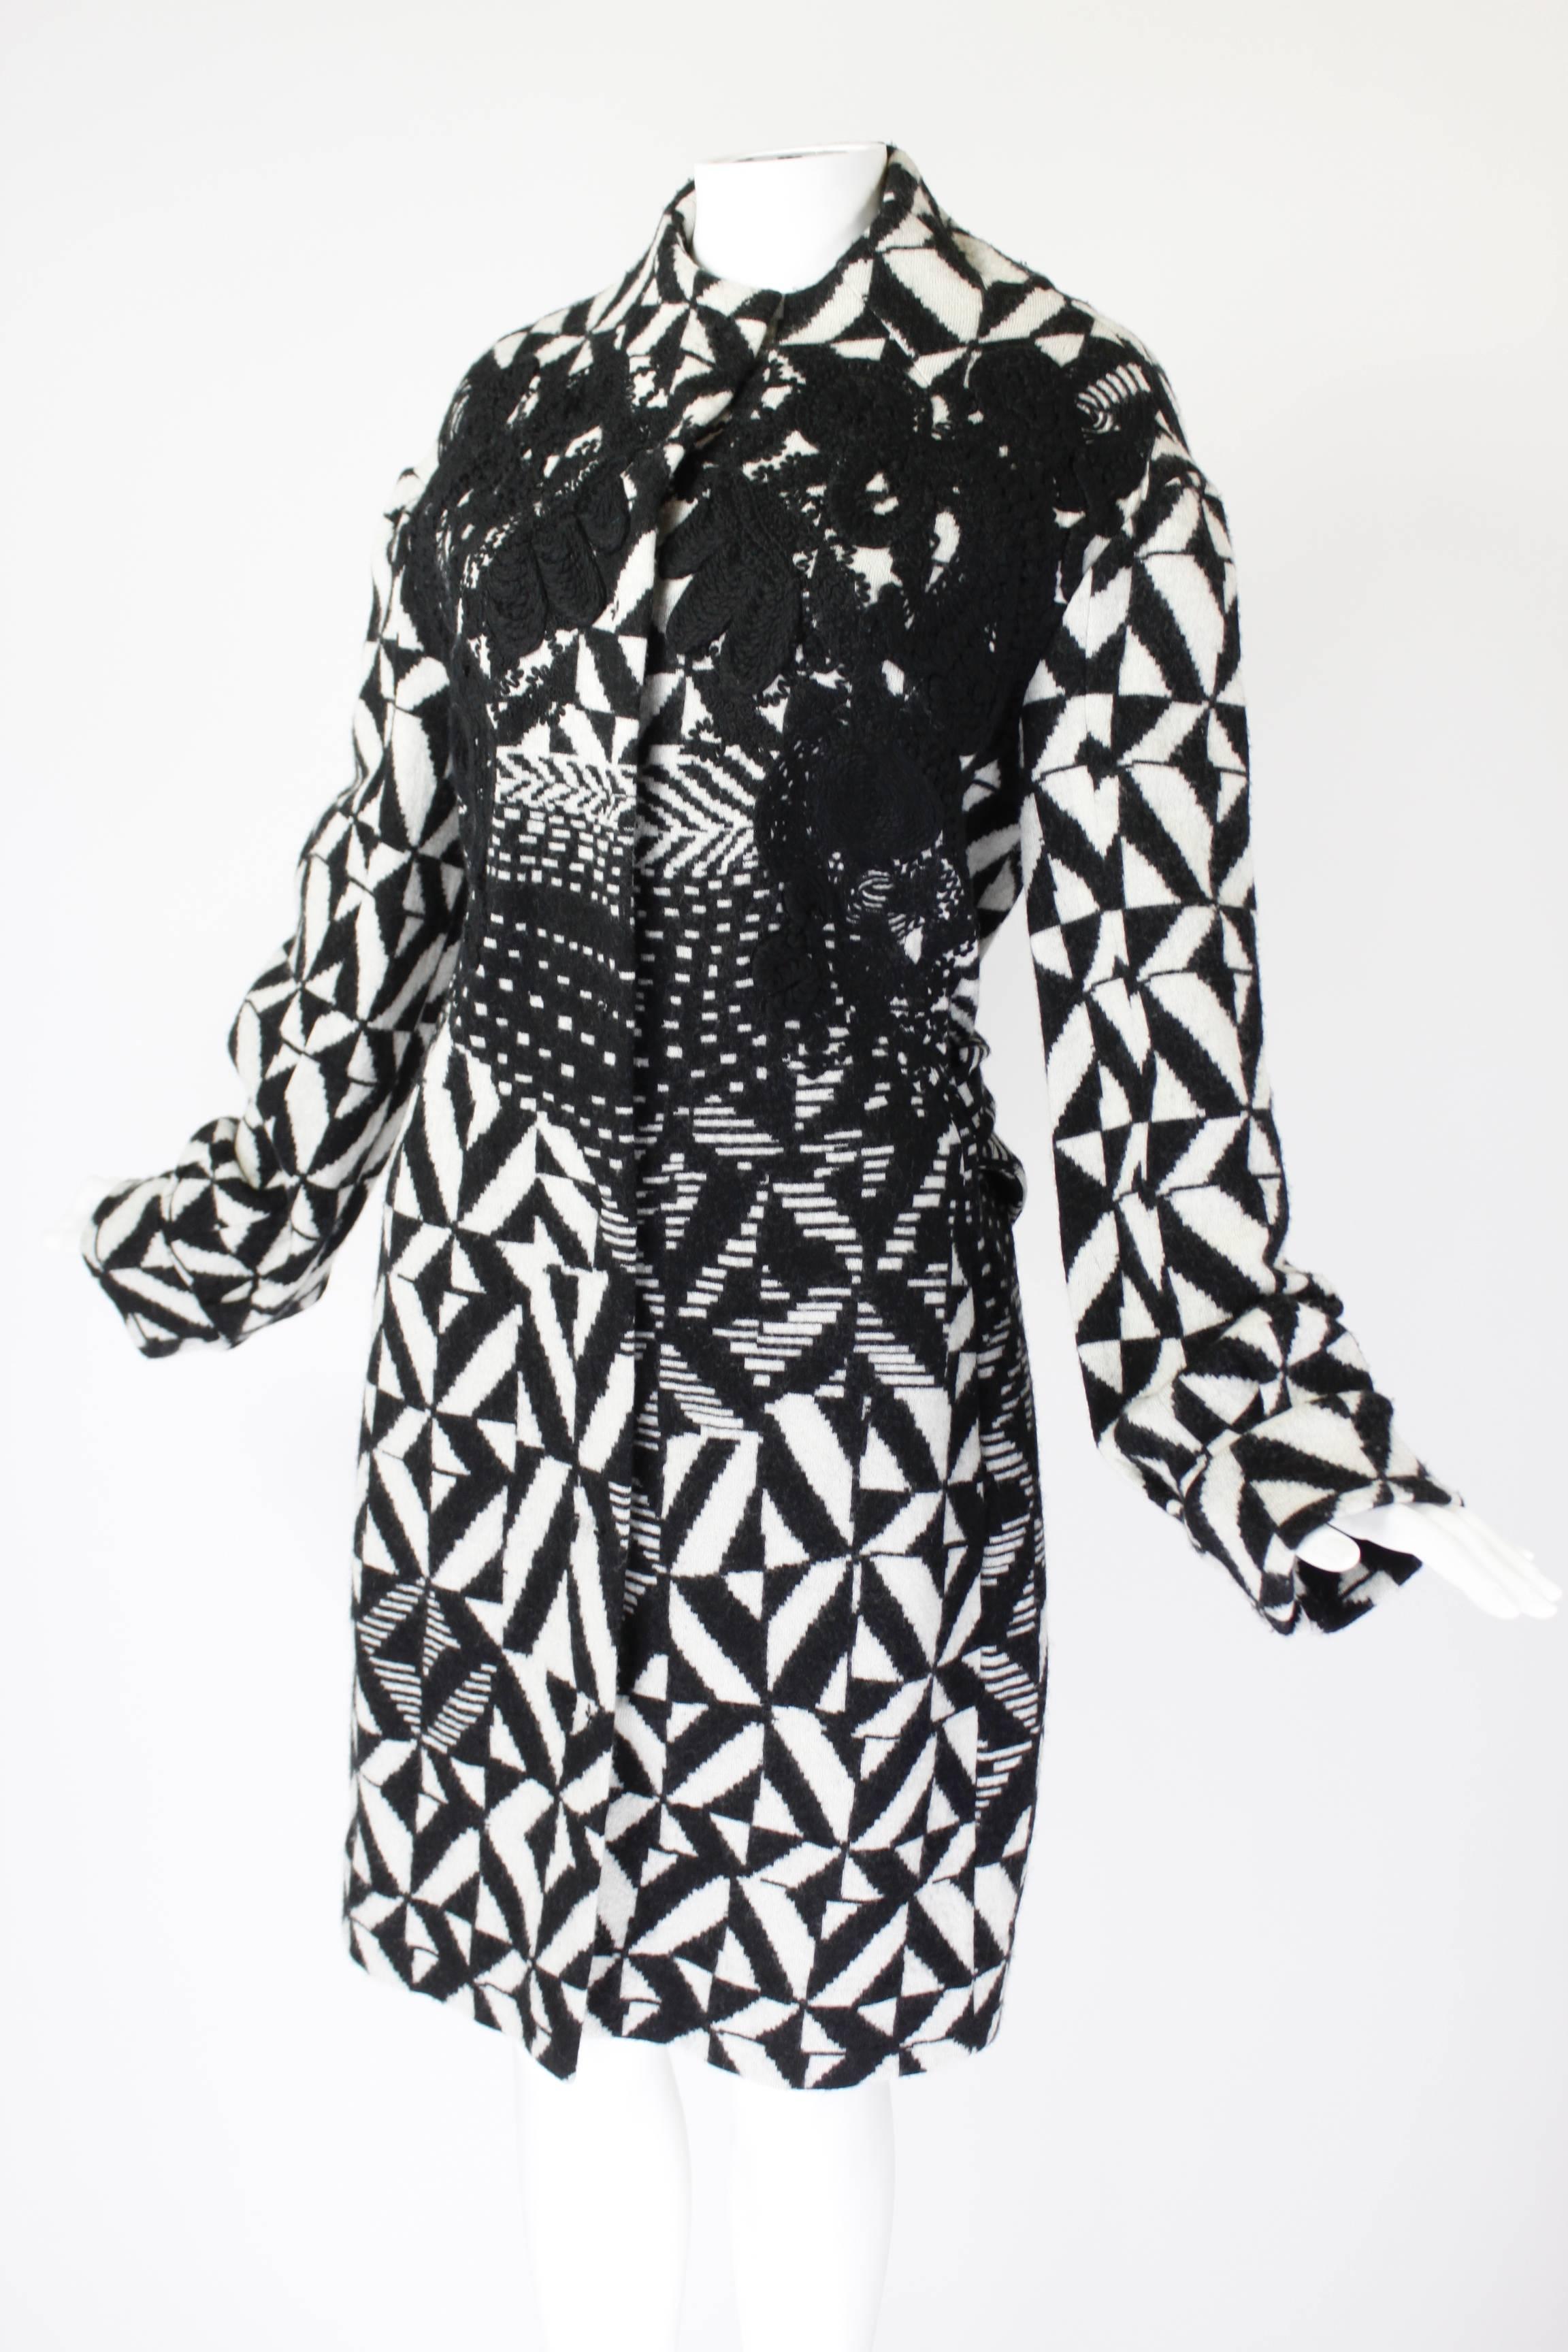 Christian Lacroix Black and White Op Art Coat with Appliqué In Excellent Condition For Sale In Los Angeles, CA